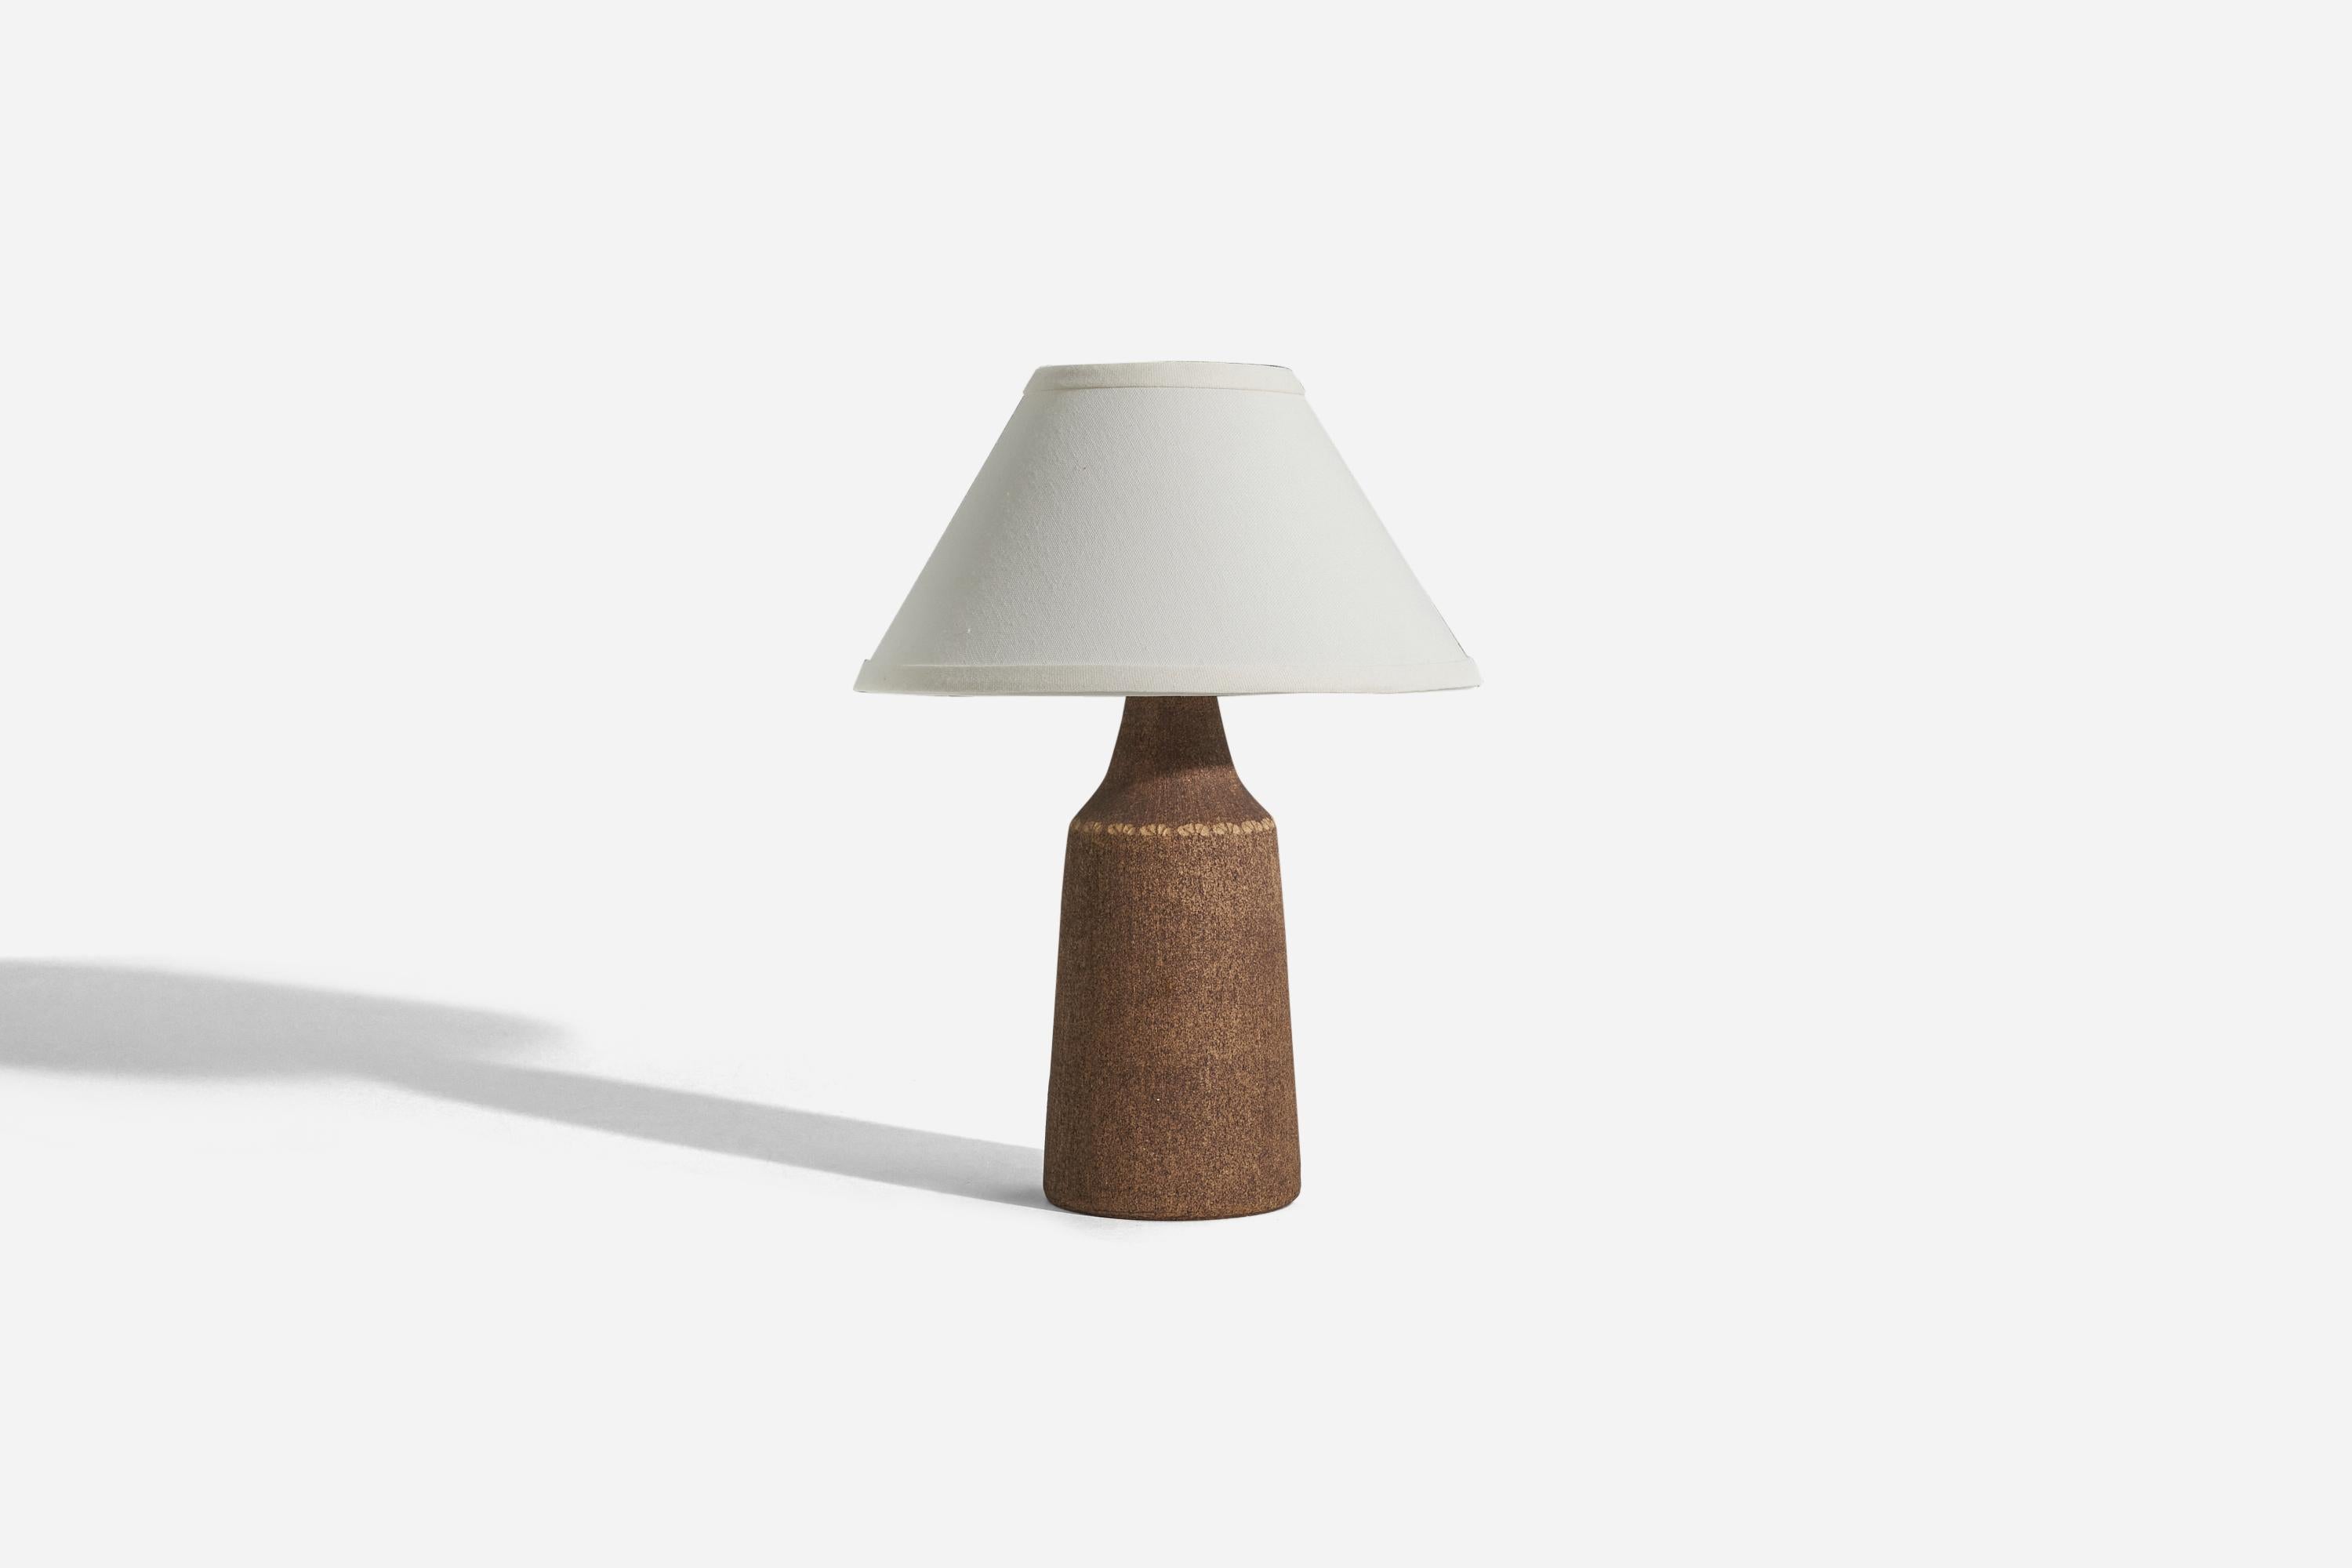 A brown, glazed stoneware table lamp designed and produced by Nils Allan Johannesson, Sweden, c. 1960s. 



